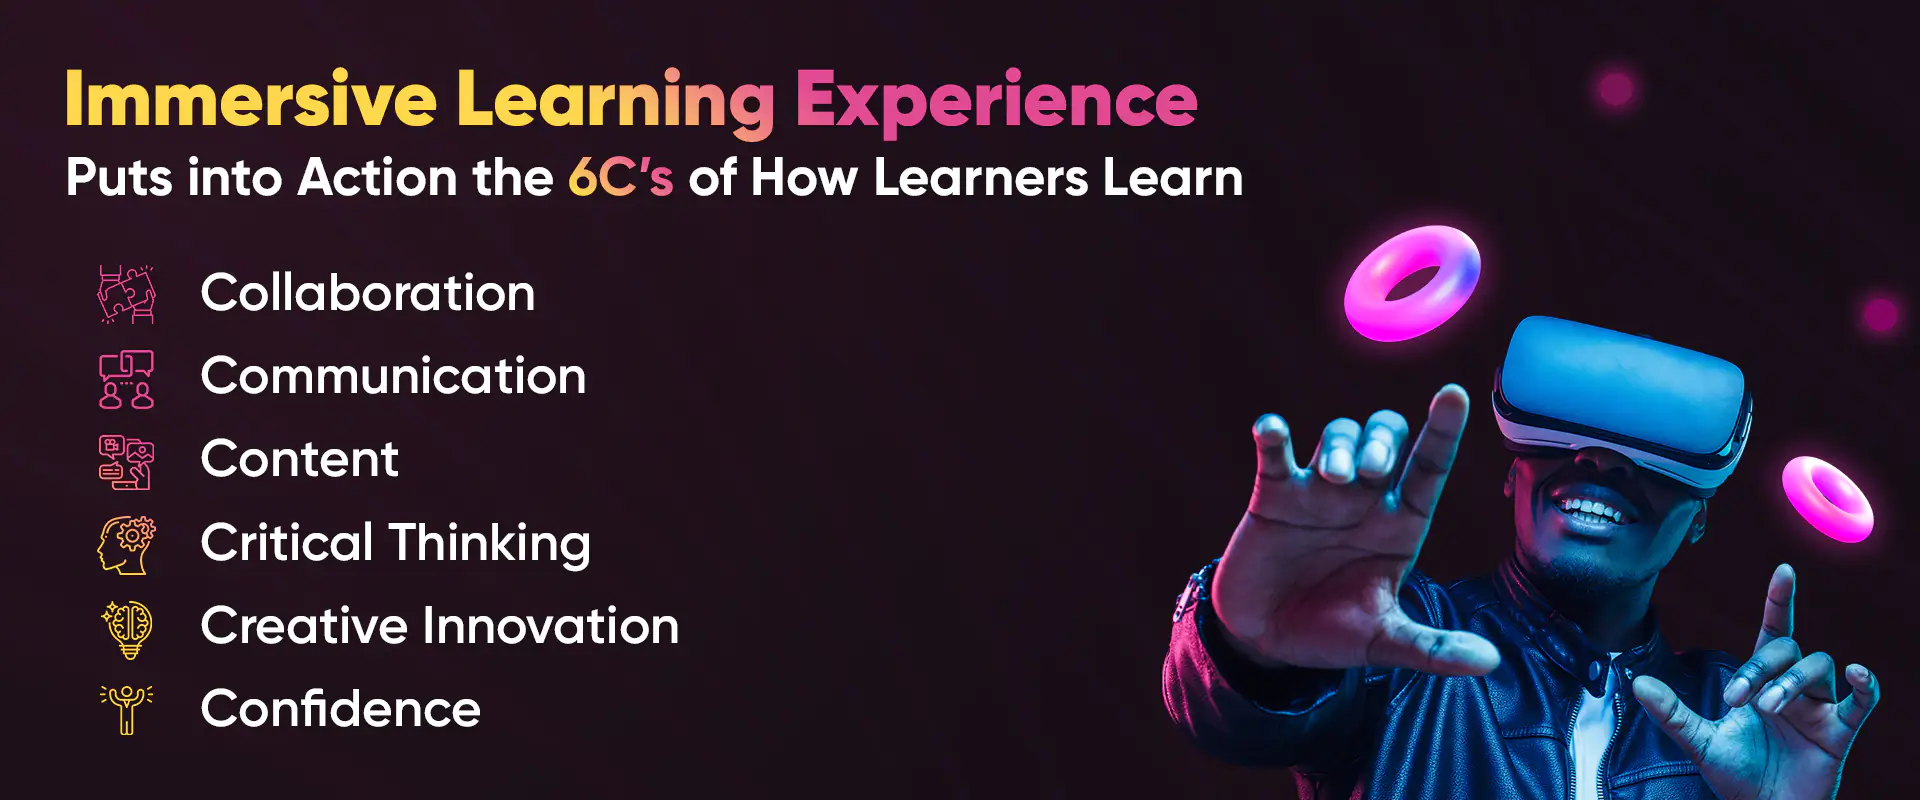 Immersive Learning Experience puts into action the 6c's of how learners learn